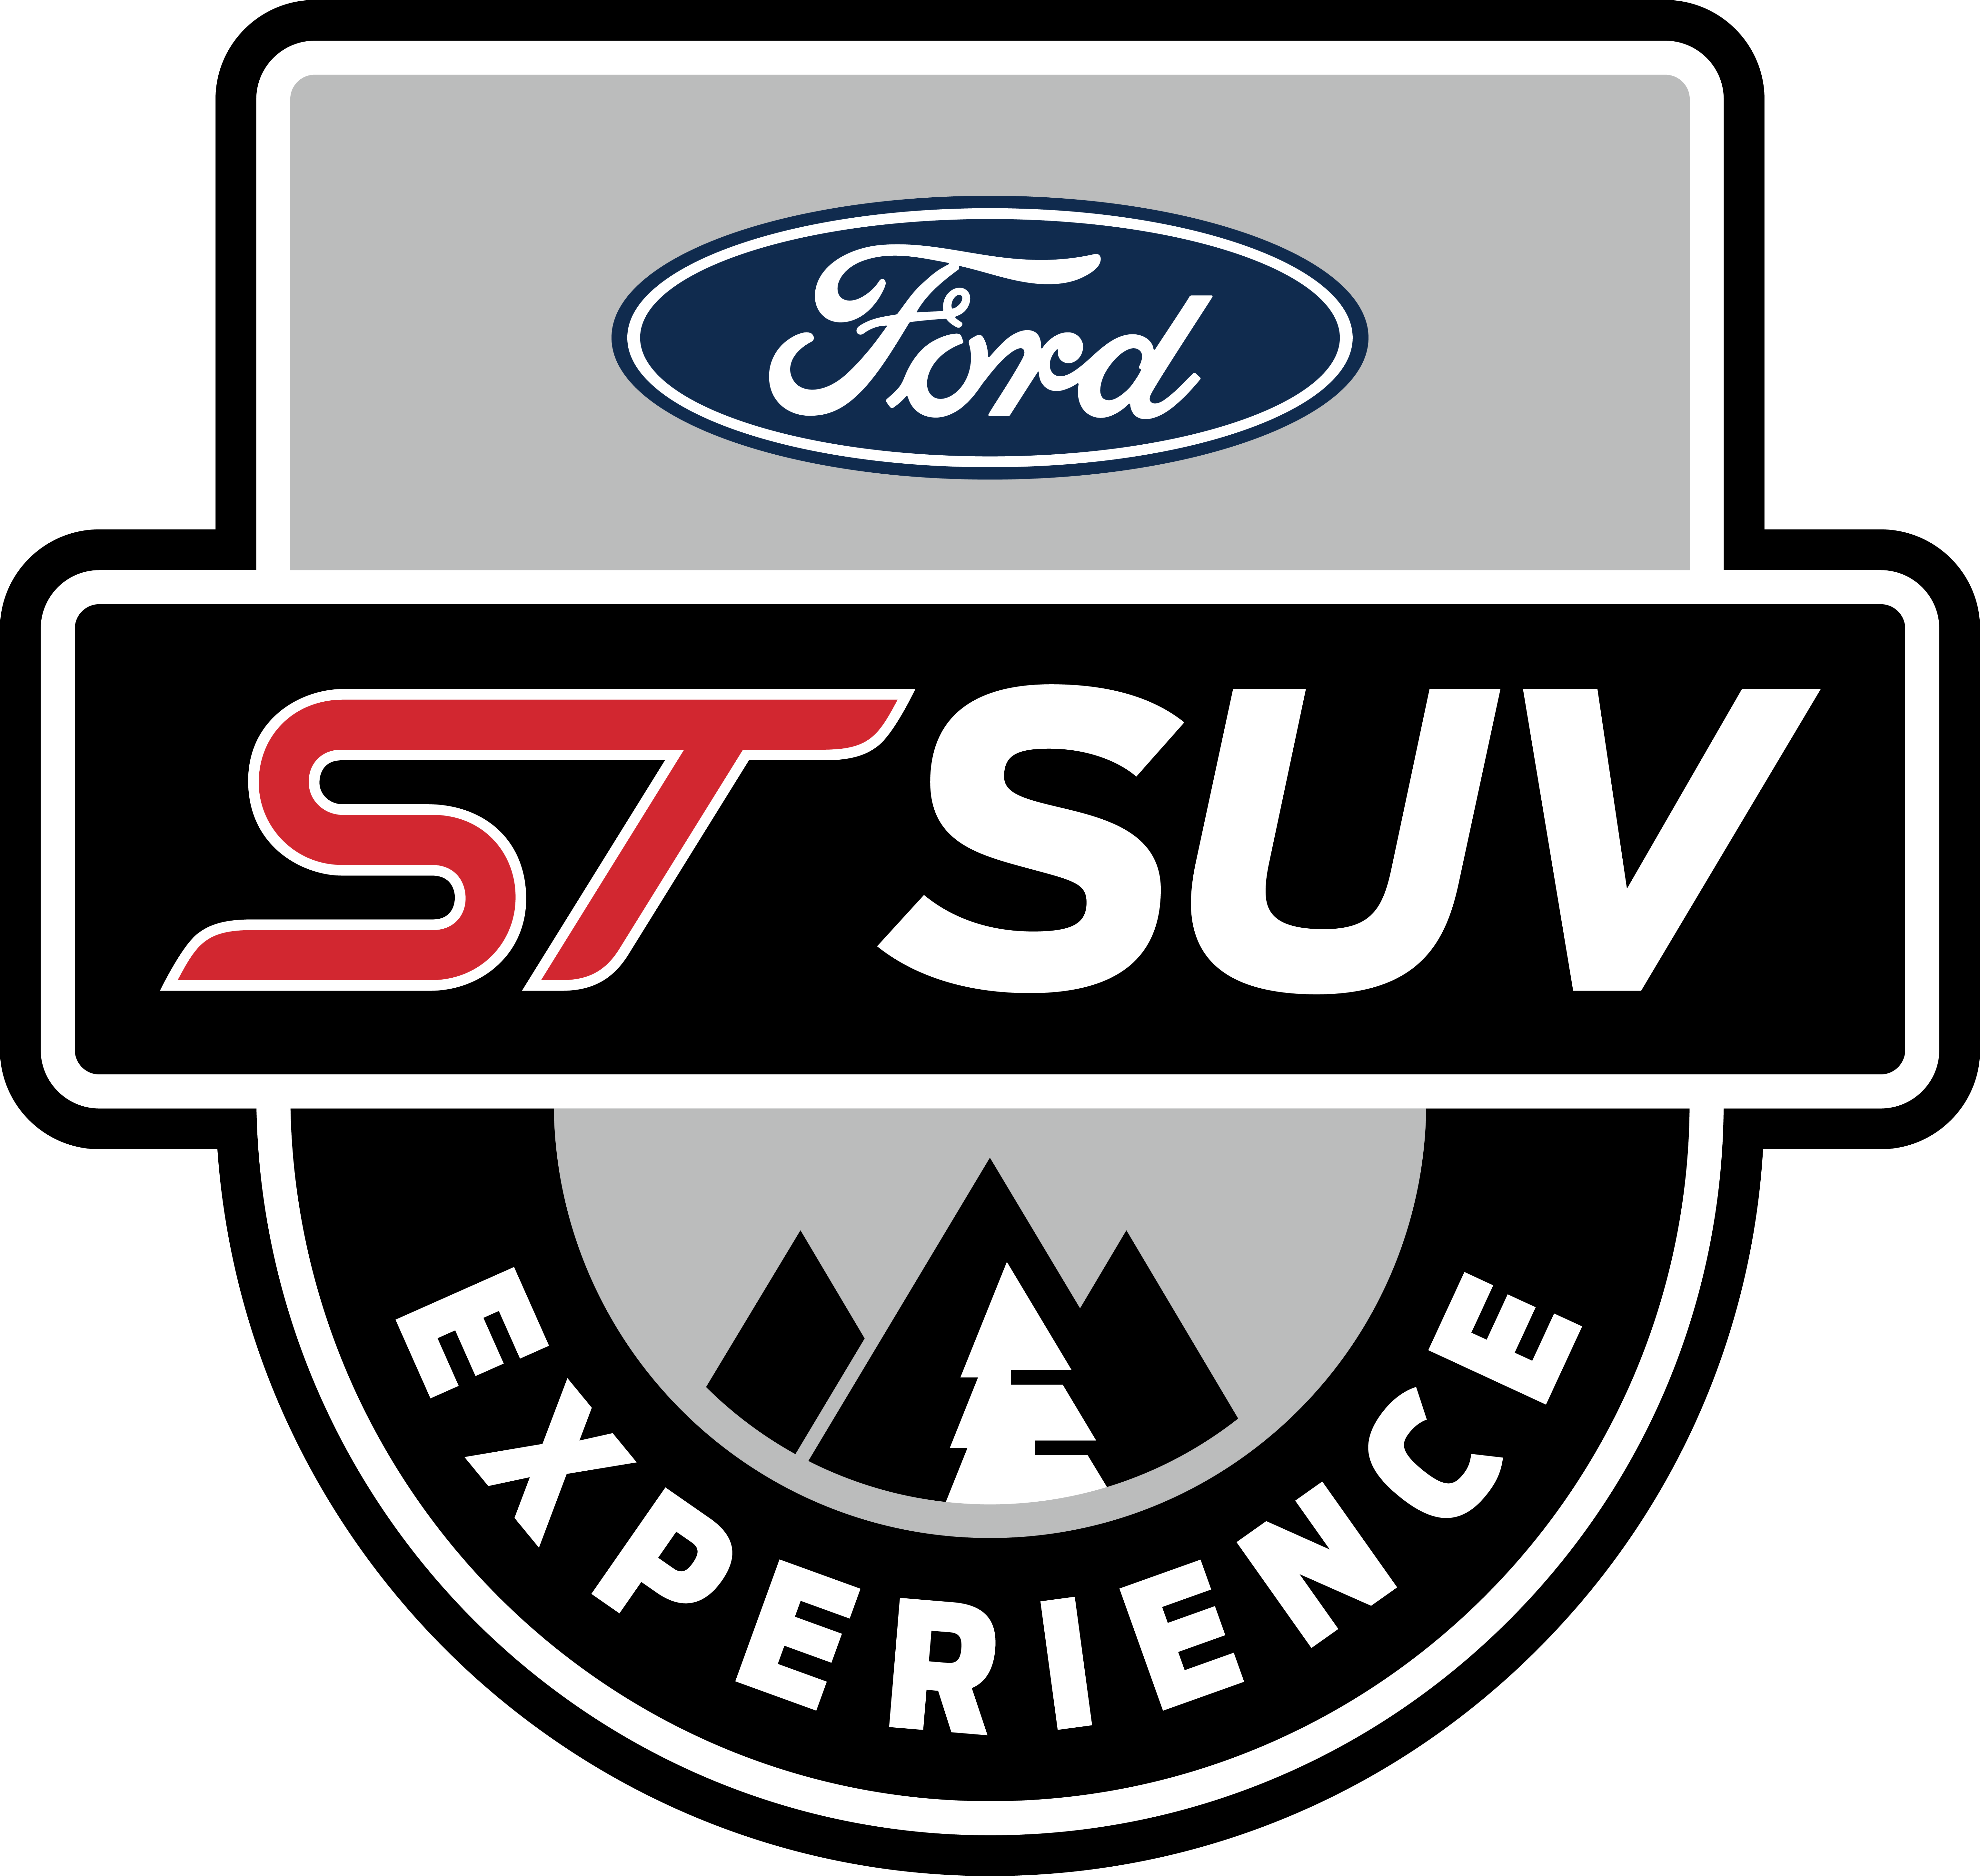 ST SUV Experience